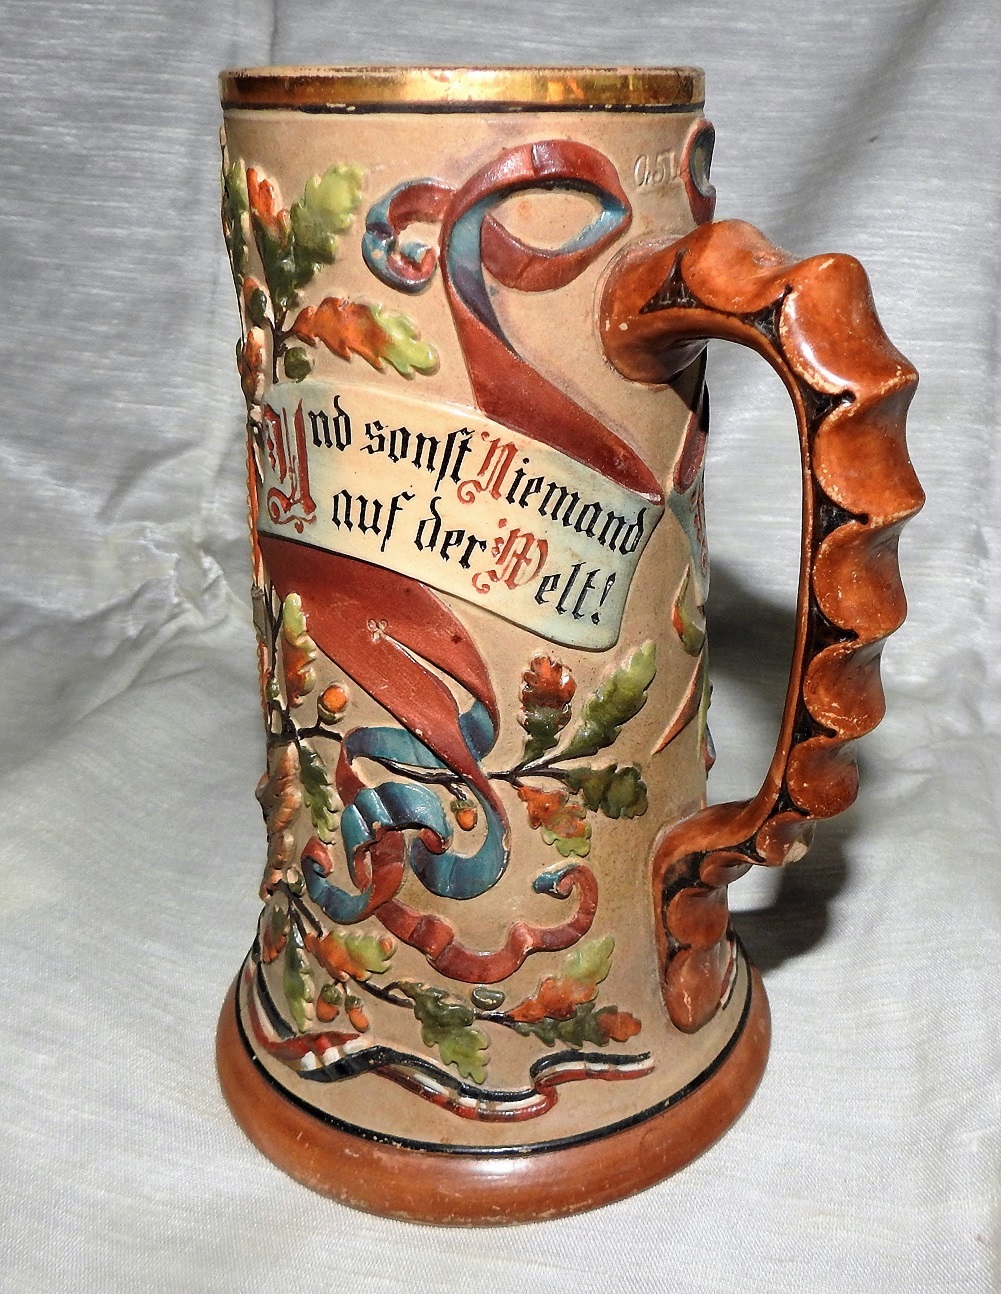 Beautiful antique Reinhold Hanke stein - any value without 